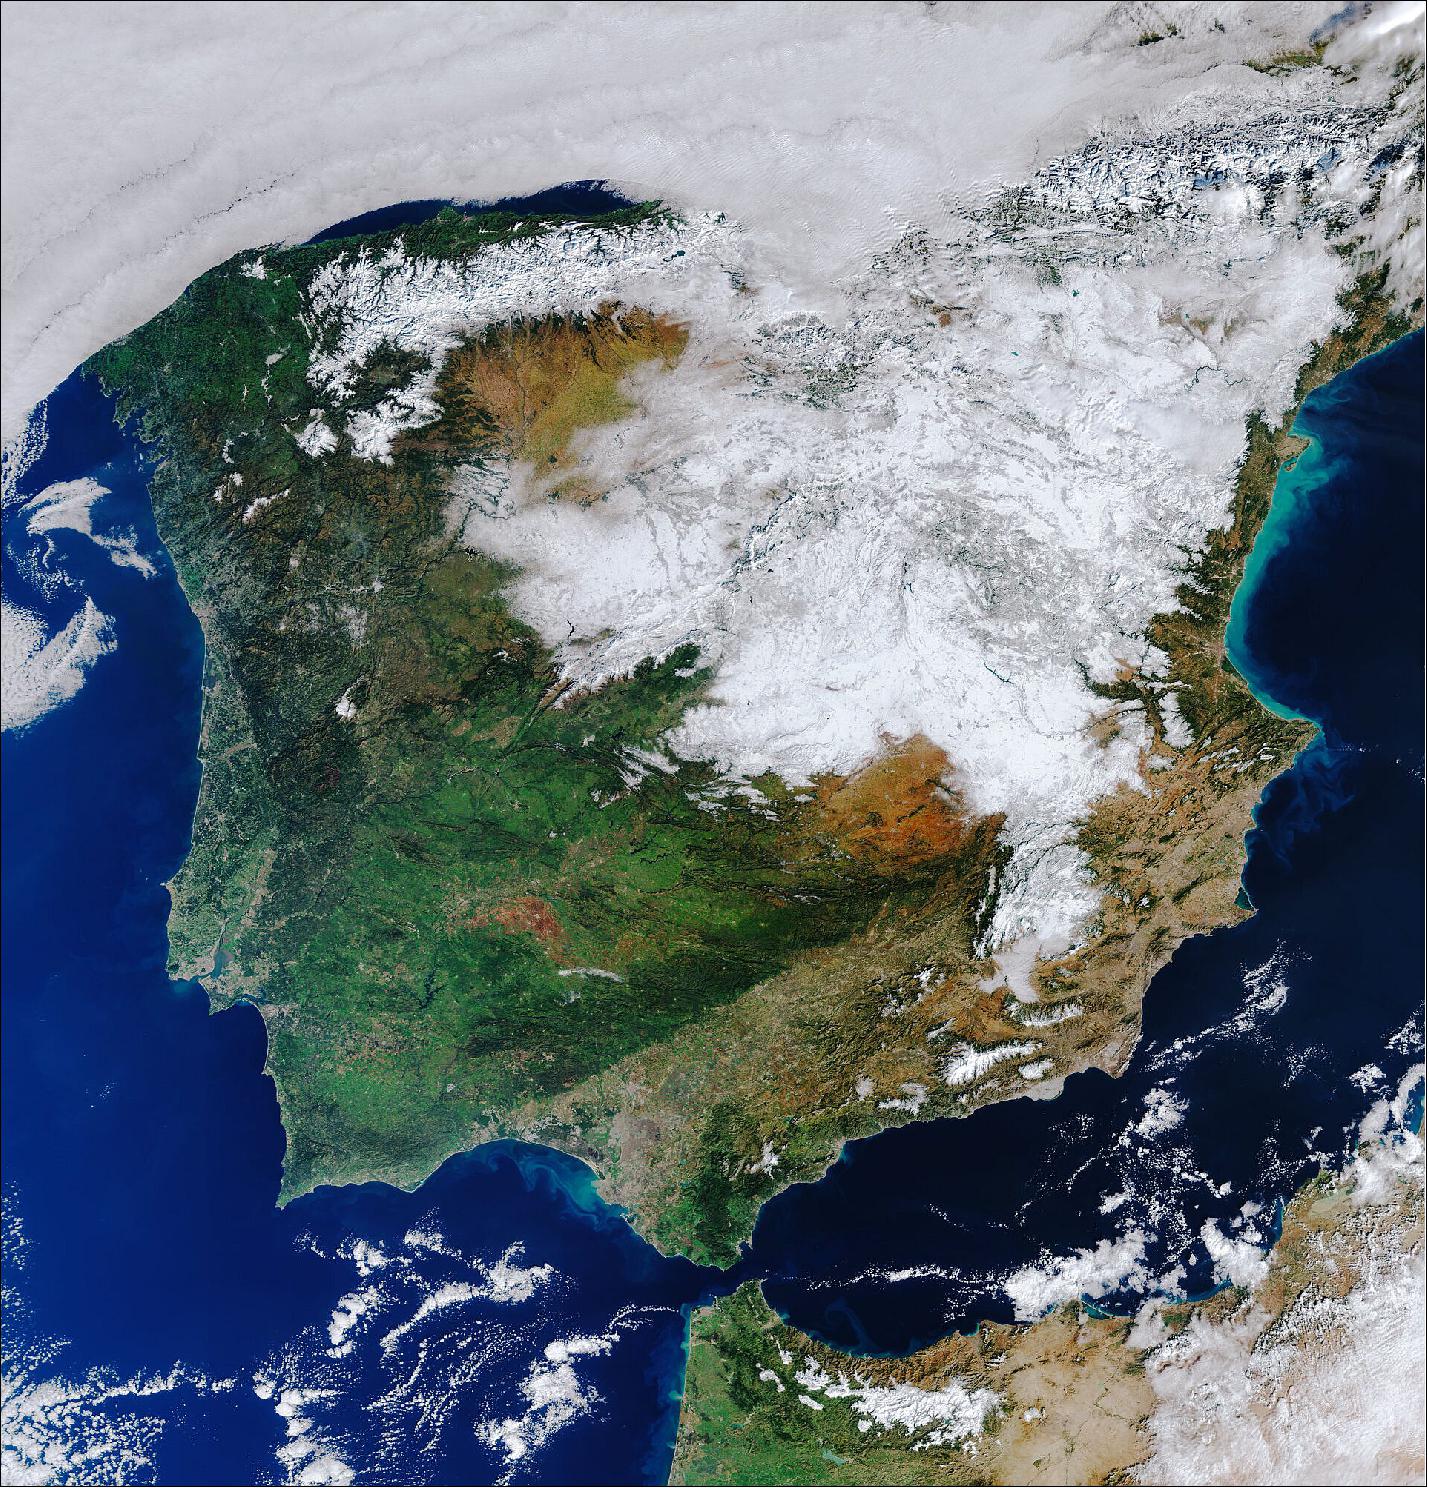 Figure 37: While the idea of snuggling under a blanket in the cold winter months is very appealing, the blanket that covers half of Spain is not remotely comforting. This satellite image, captured on 12 January at 11:40 CET, shows how much of the country is still facing hazardous conditions following the snow that fell at the weekend – the heaviest snowfall the country has had in five decades (image credit: ESA, the image contains modified Copernicus Sentinel data (2021), processed by ESA, CC BY-SA 3.0 IGO)